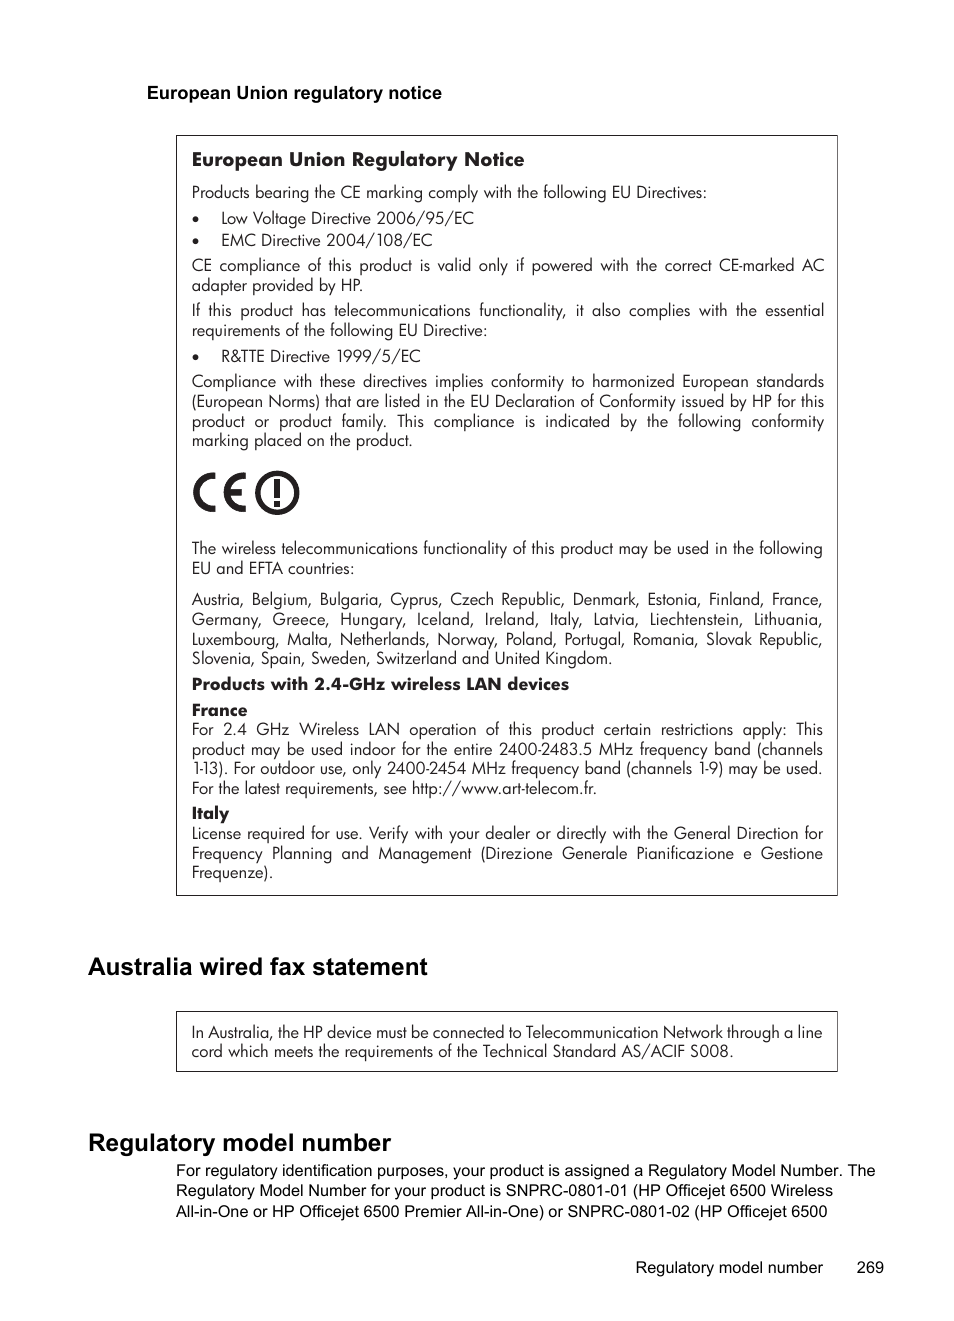 European union regulatory notice, Australia wired fax statement, Regulatory model number | HP Officejet 6500 User Manual | Page 273 / 294